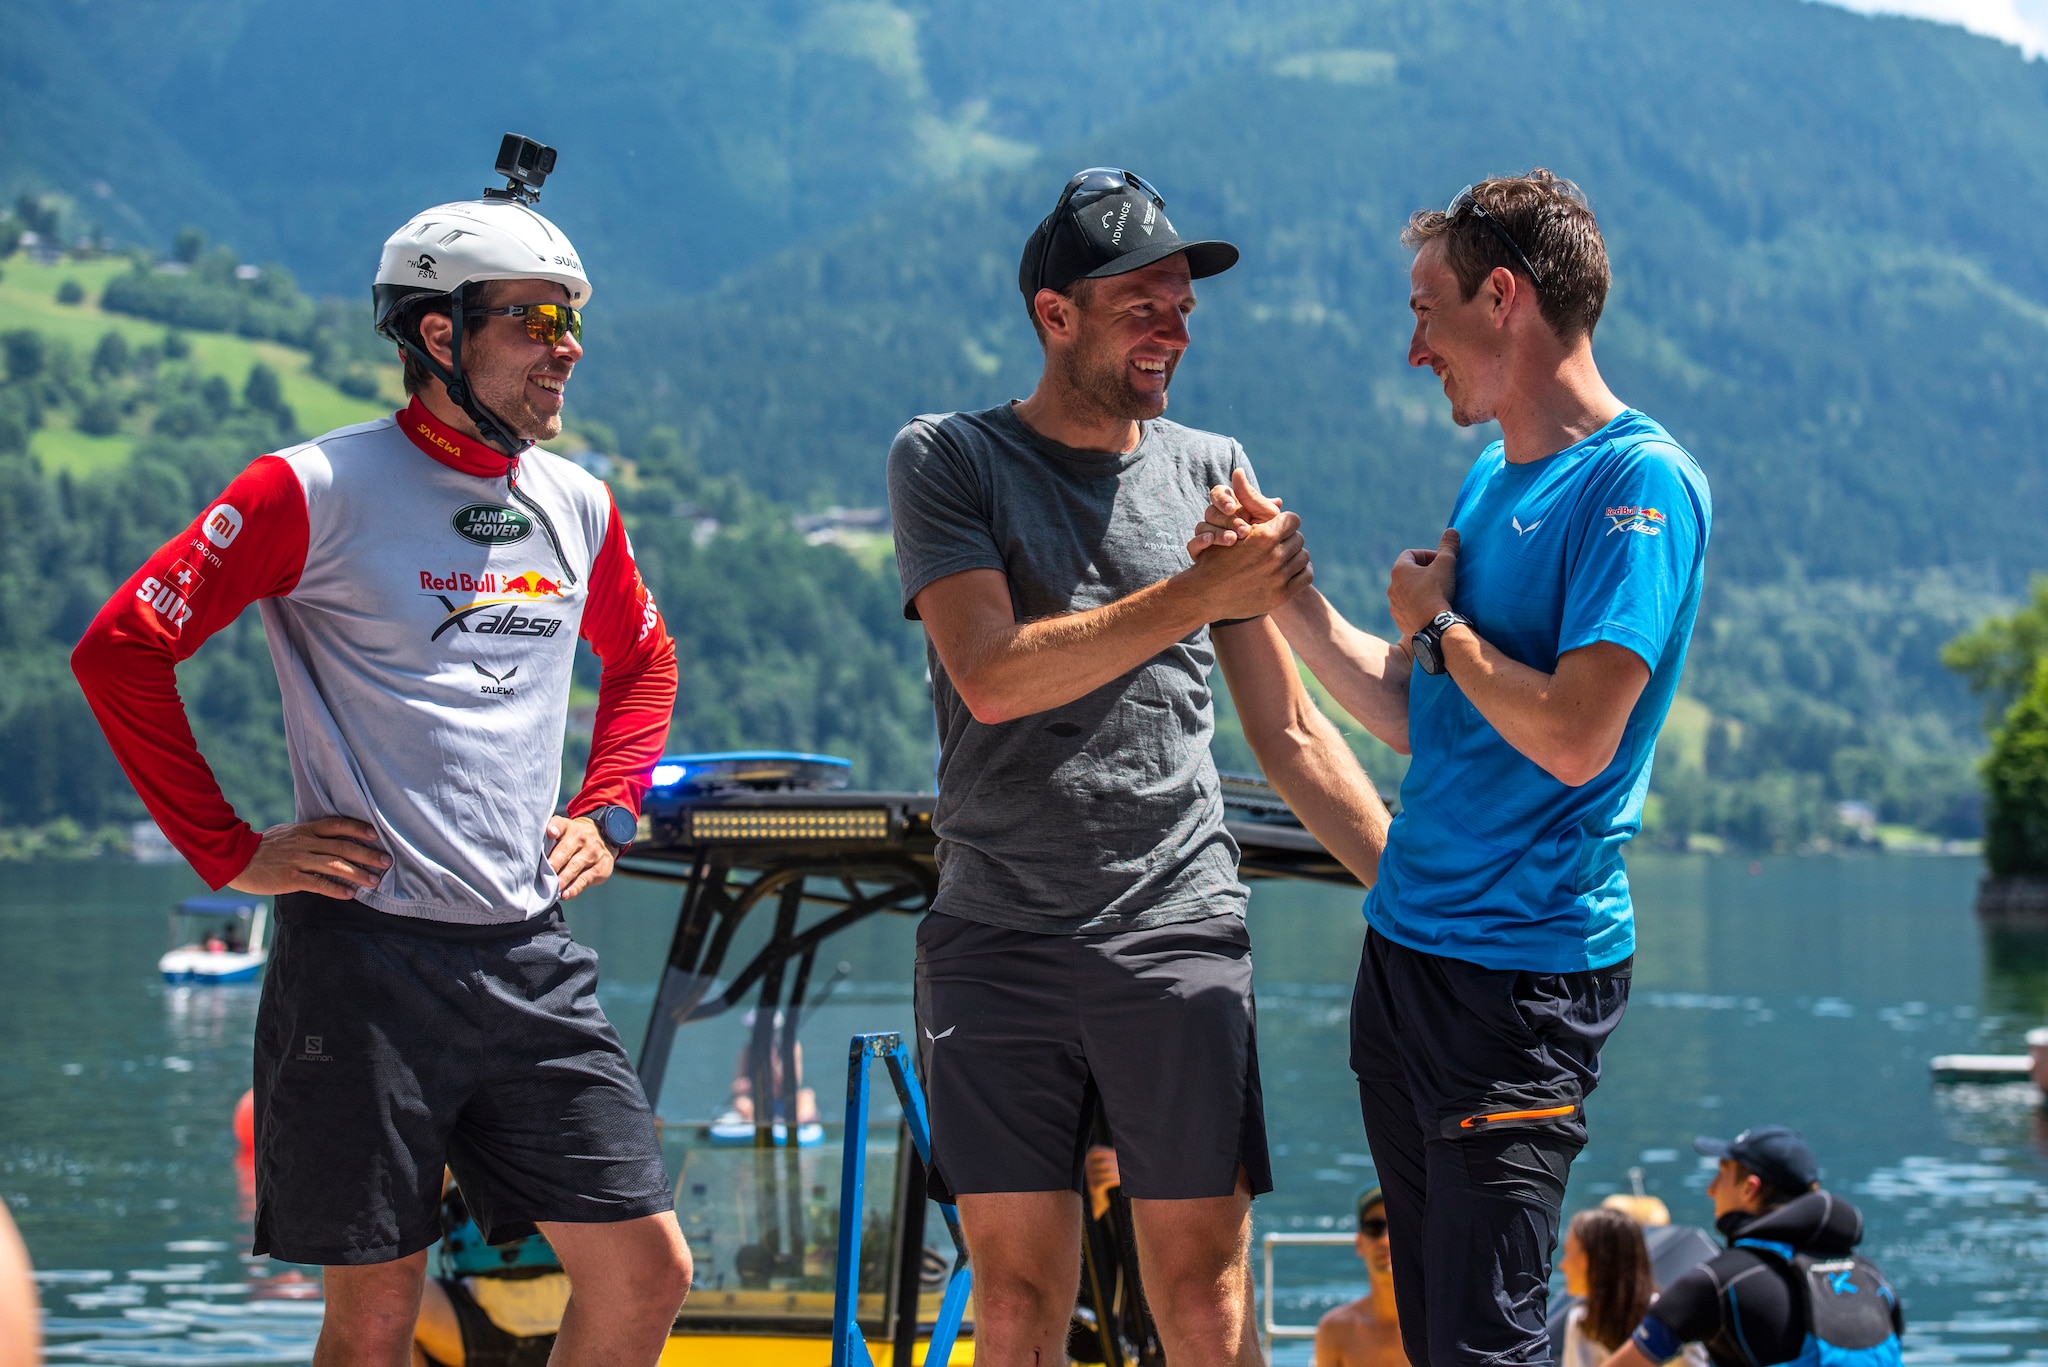 RBC celebrate in the Red Bull X-Alps finish in Zell am See, Austria on June 29, 2021.